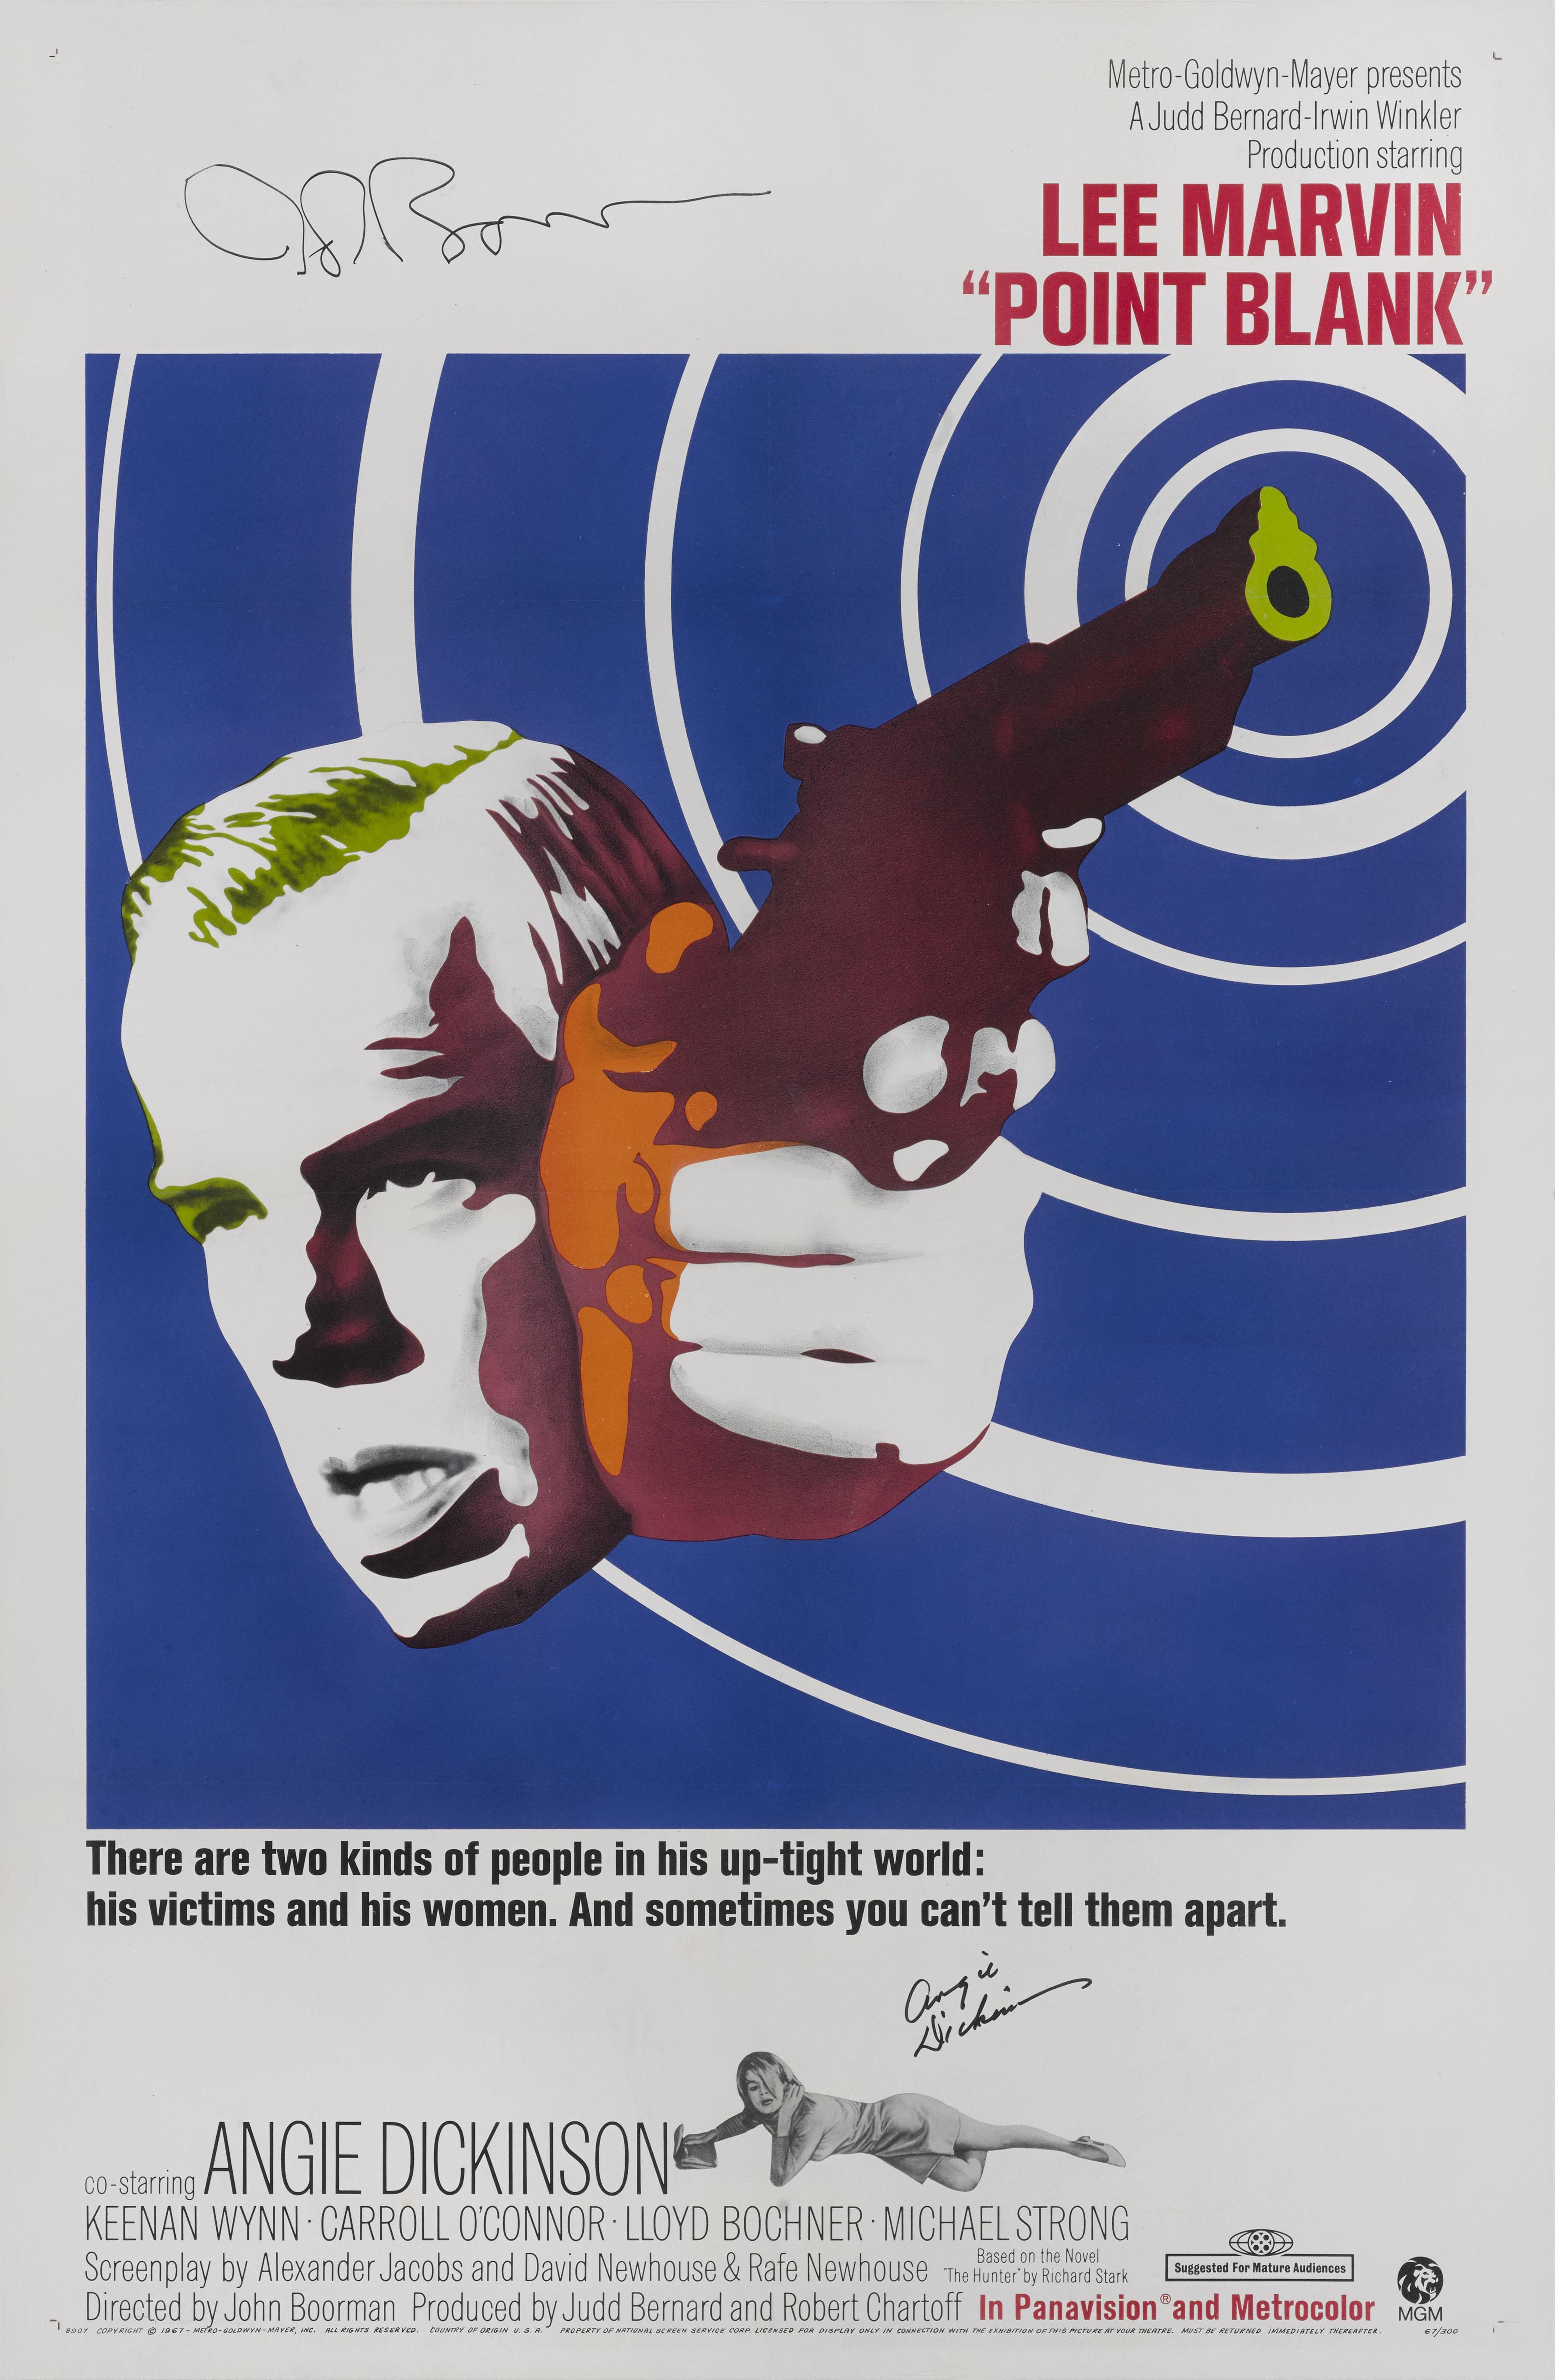 Original US film poster for 1967 film Point Blank. The film was directed by John Boorman at Lee Marvin's request, and stars Marvin, Angie Dickinson and Keenan Wynn. This film was not a box-office success at the time of release, but has gone on to